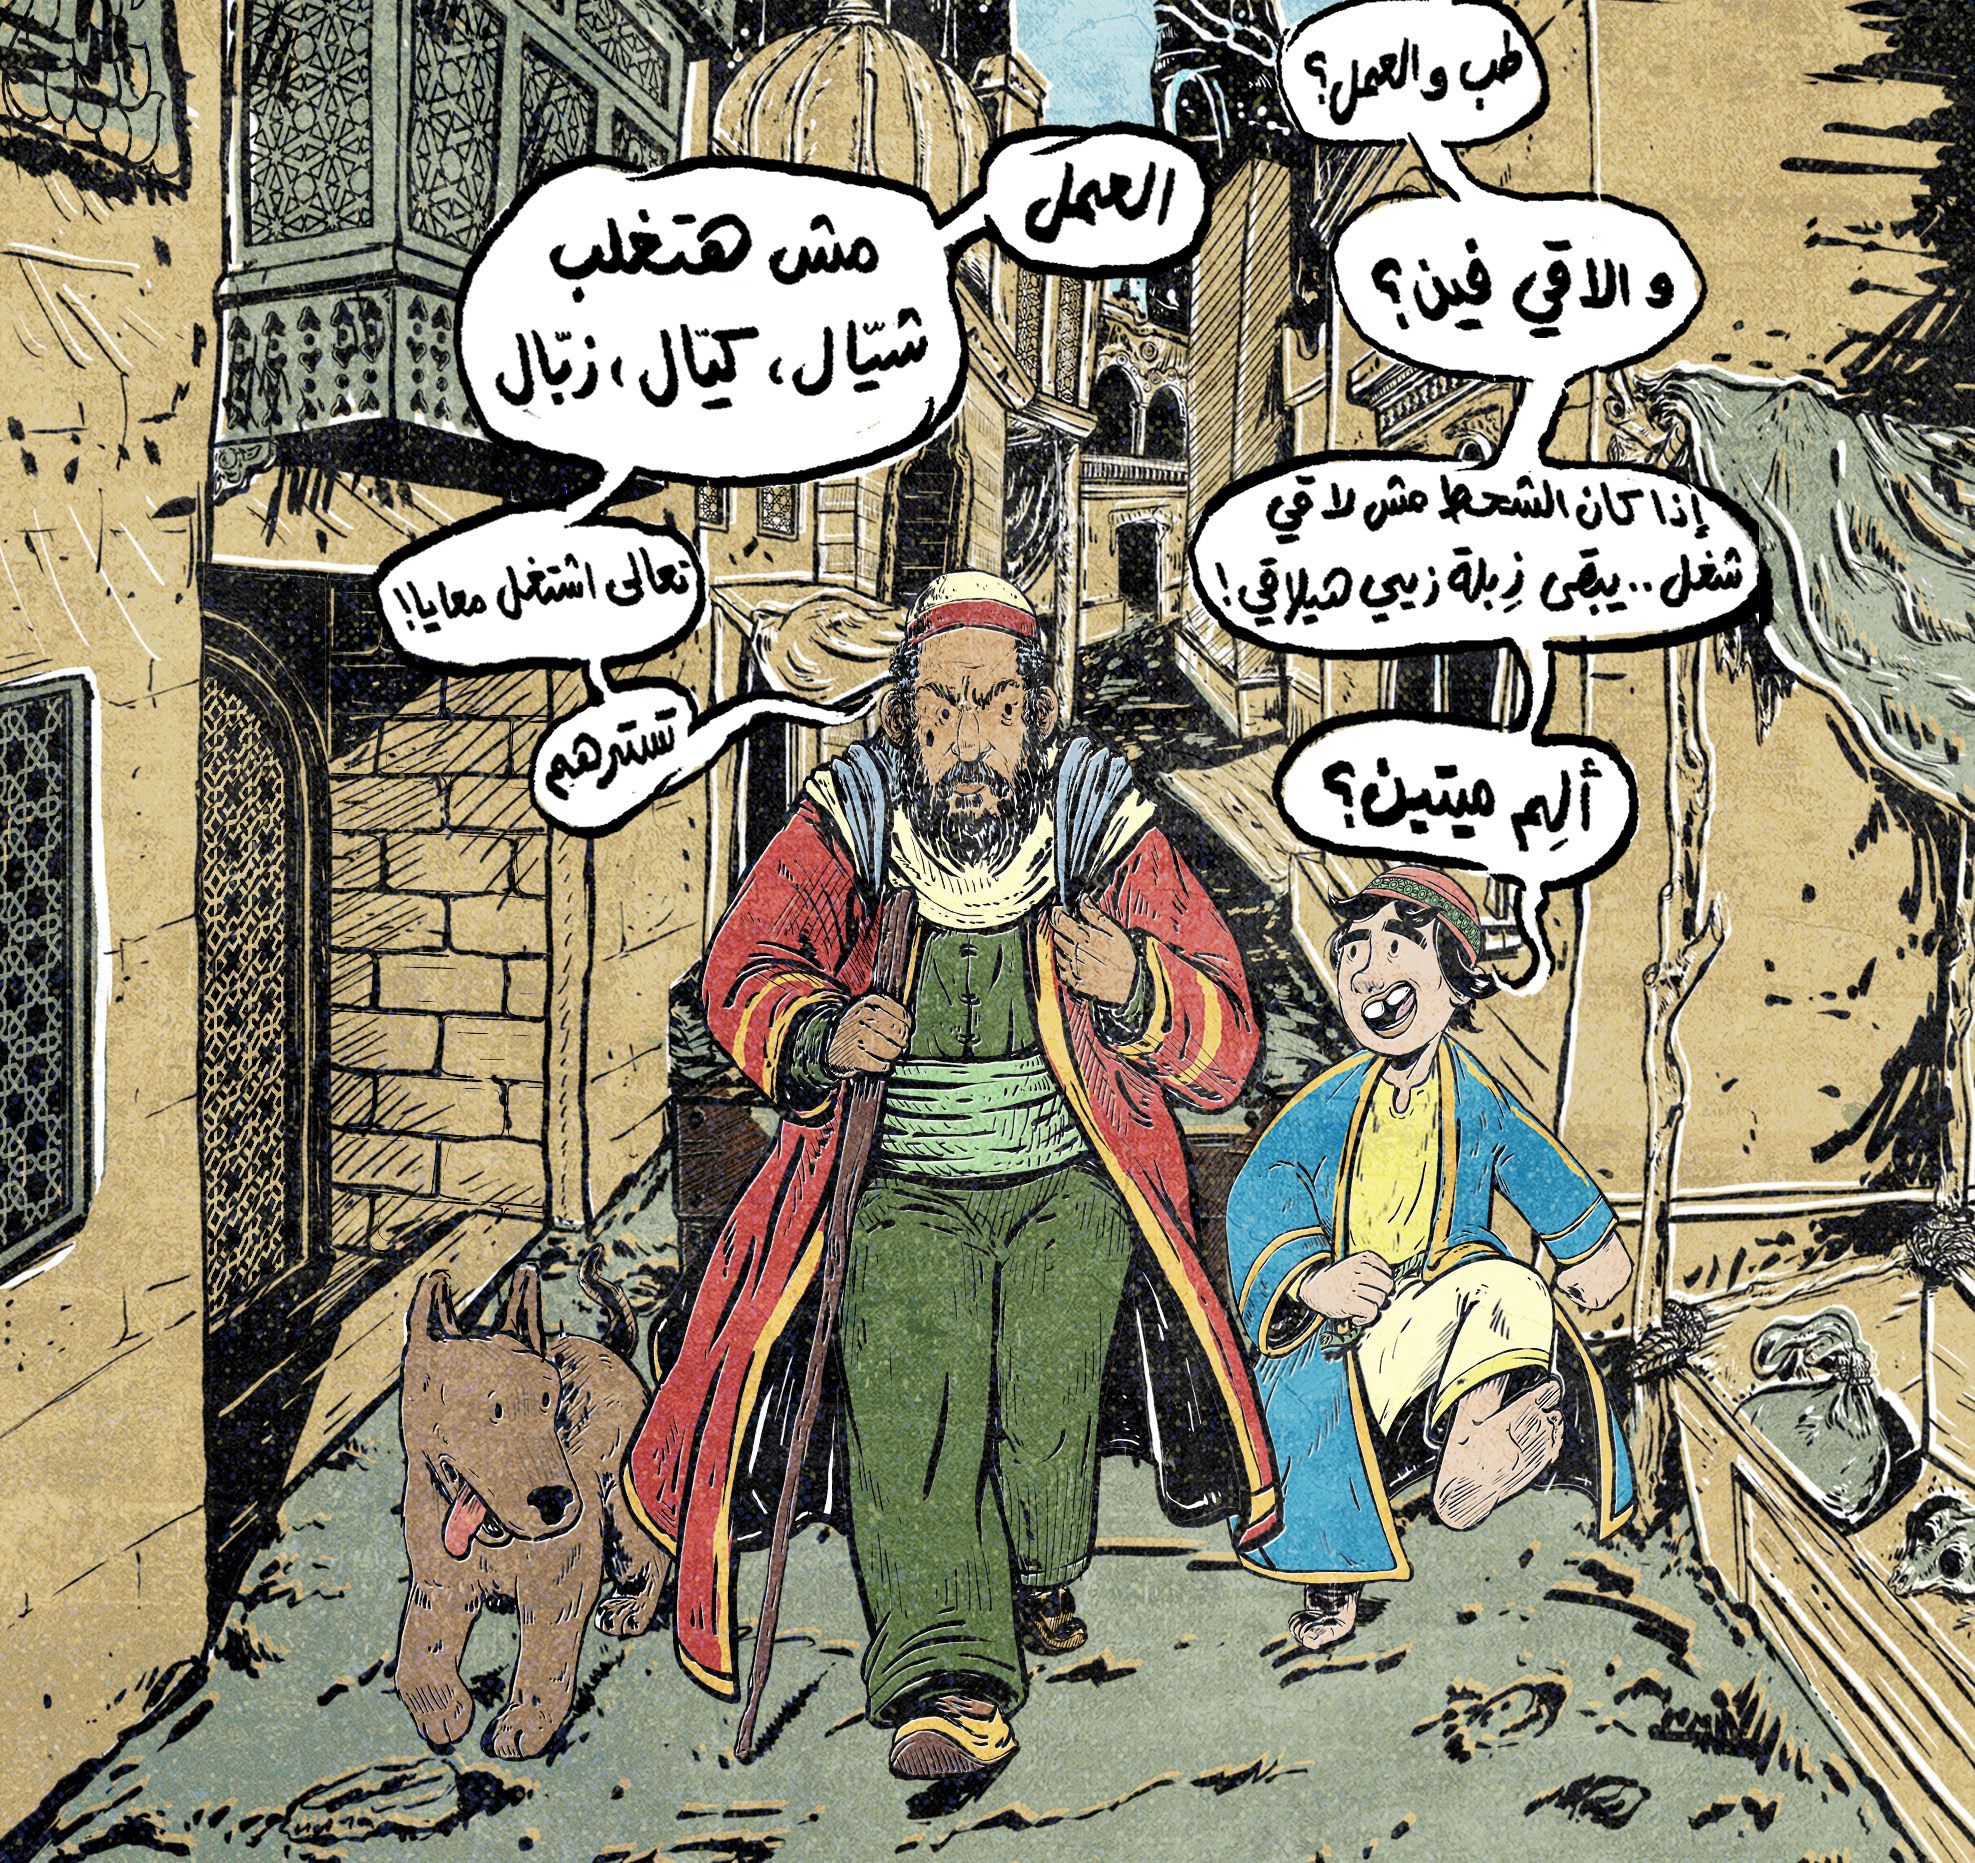 The comic tells the story of a time in Egypt's history through the fictional characters 'Am Yehia (L) and Maymoun (R)